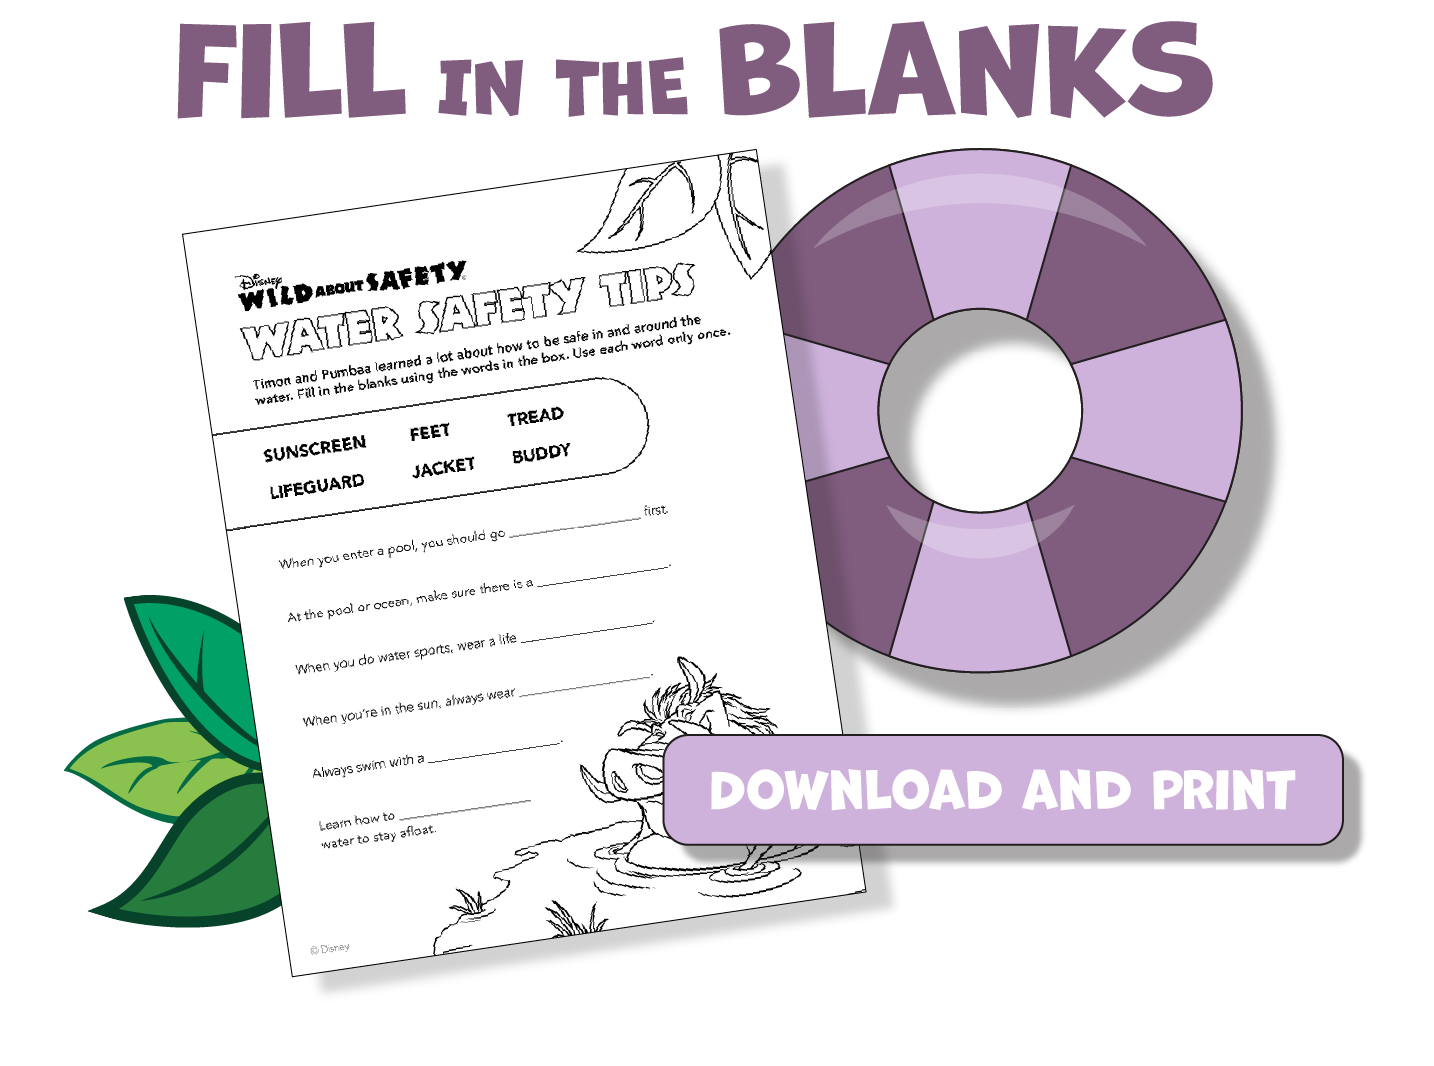 Download and print "Fill in the Blanks" activity sheet